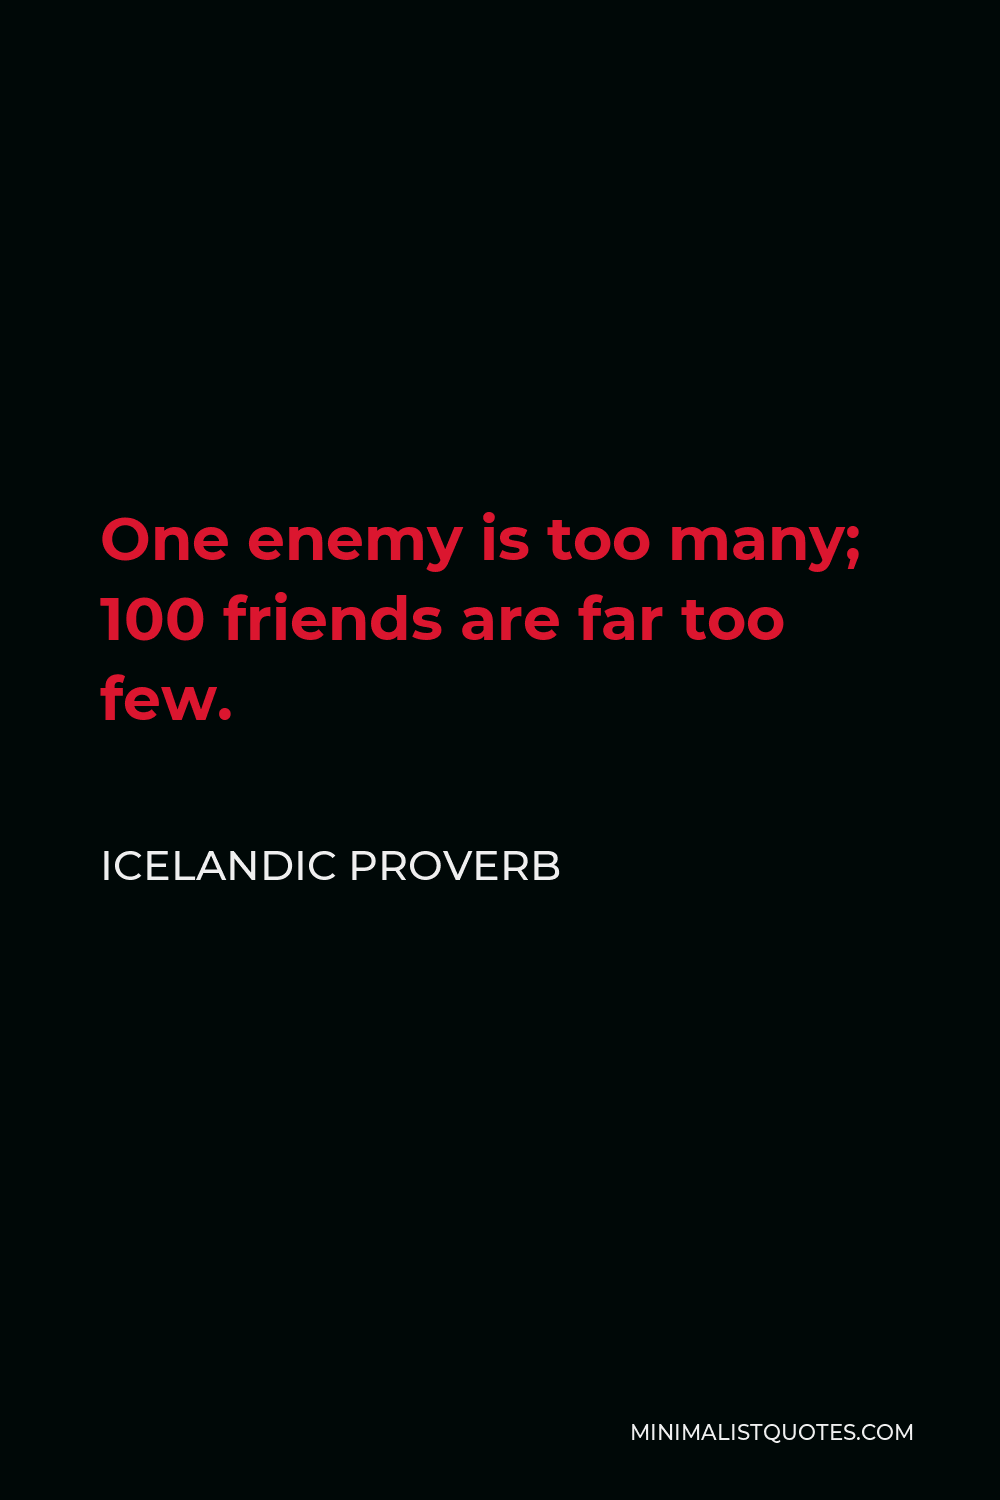 Icelandic Proverb Quote - One enemy is too many; 100 friends are far too few.